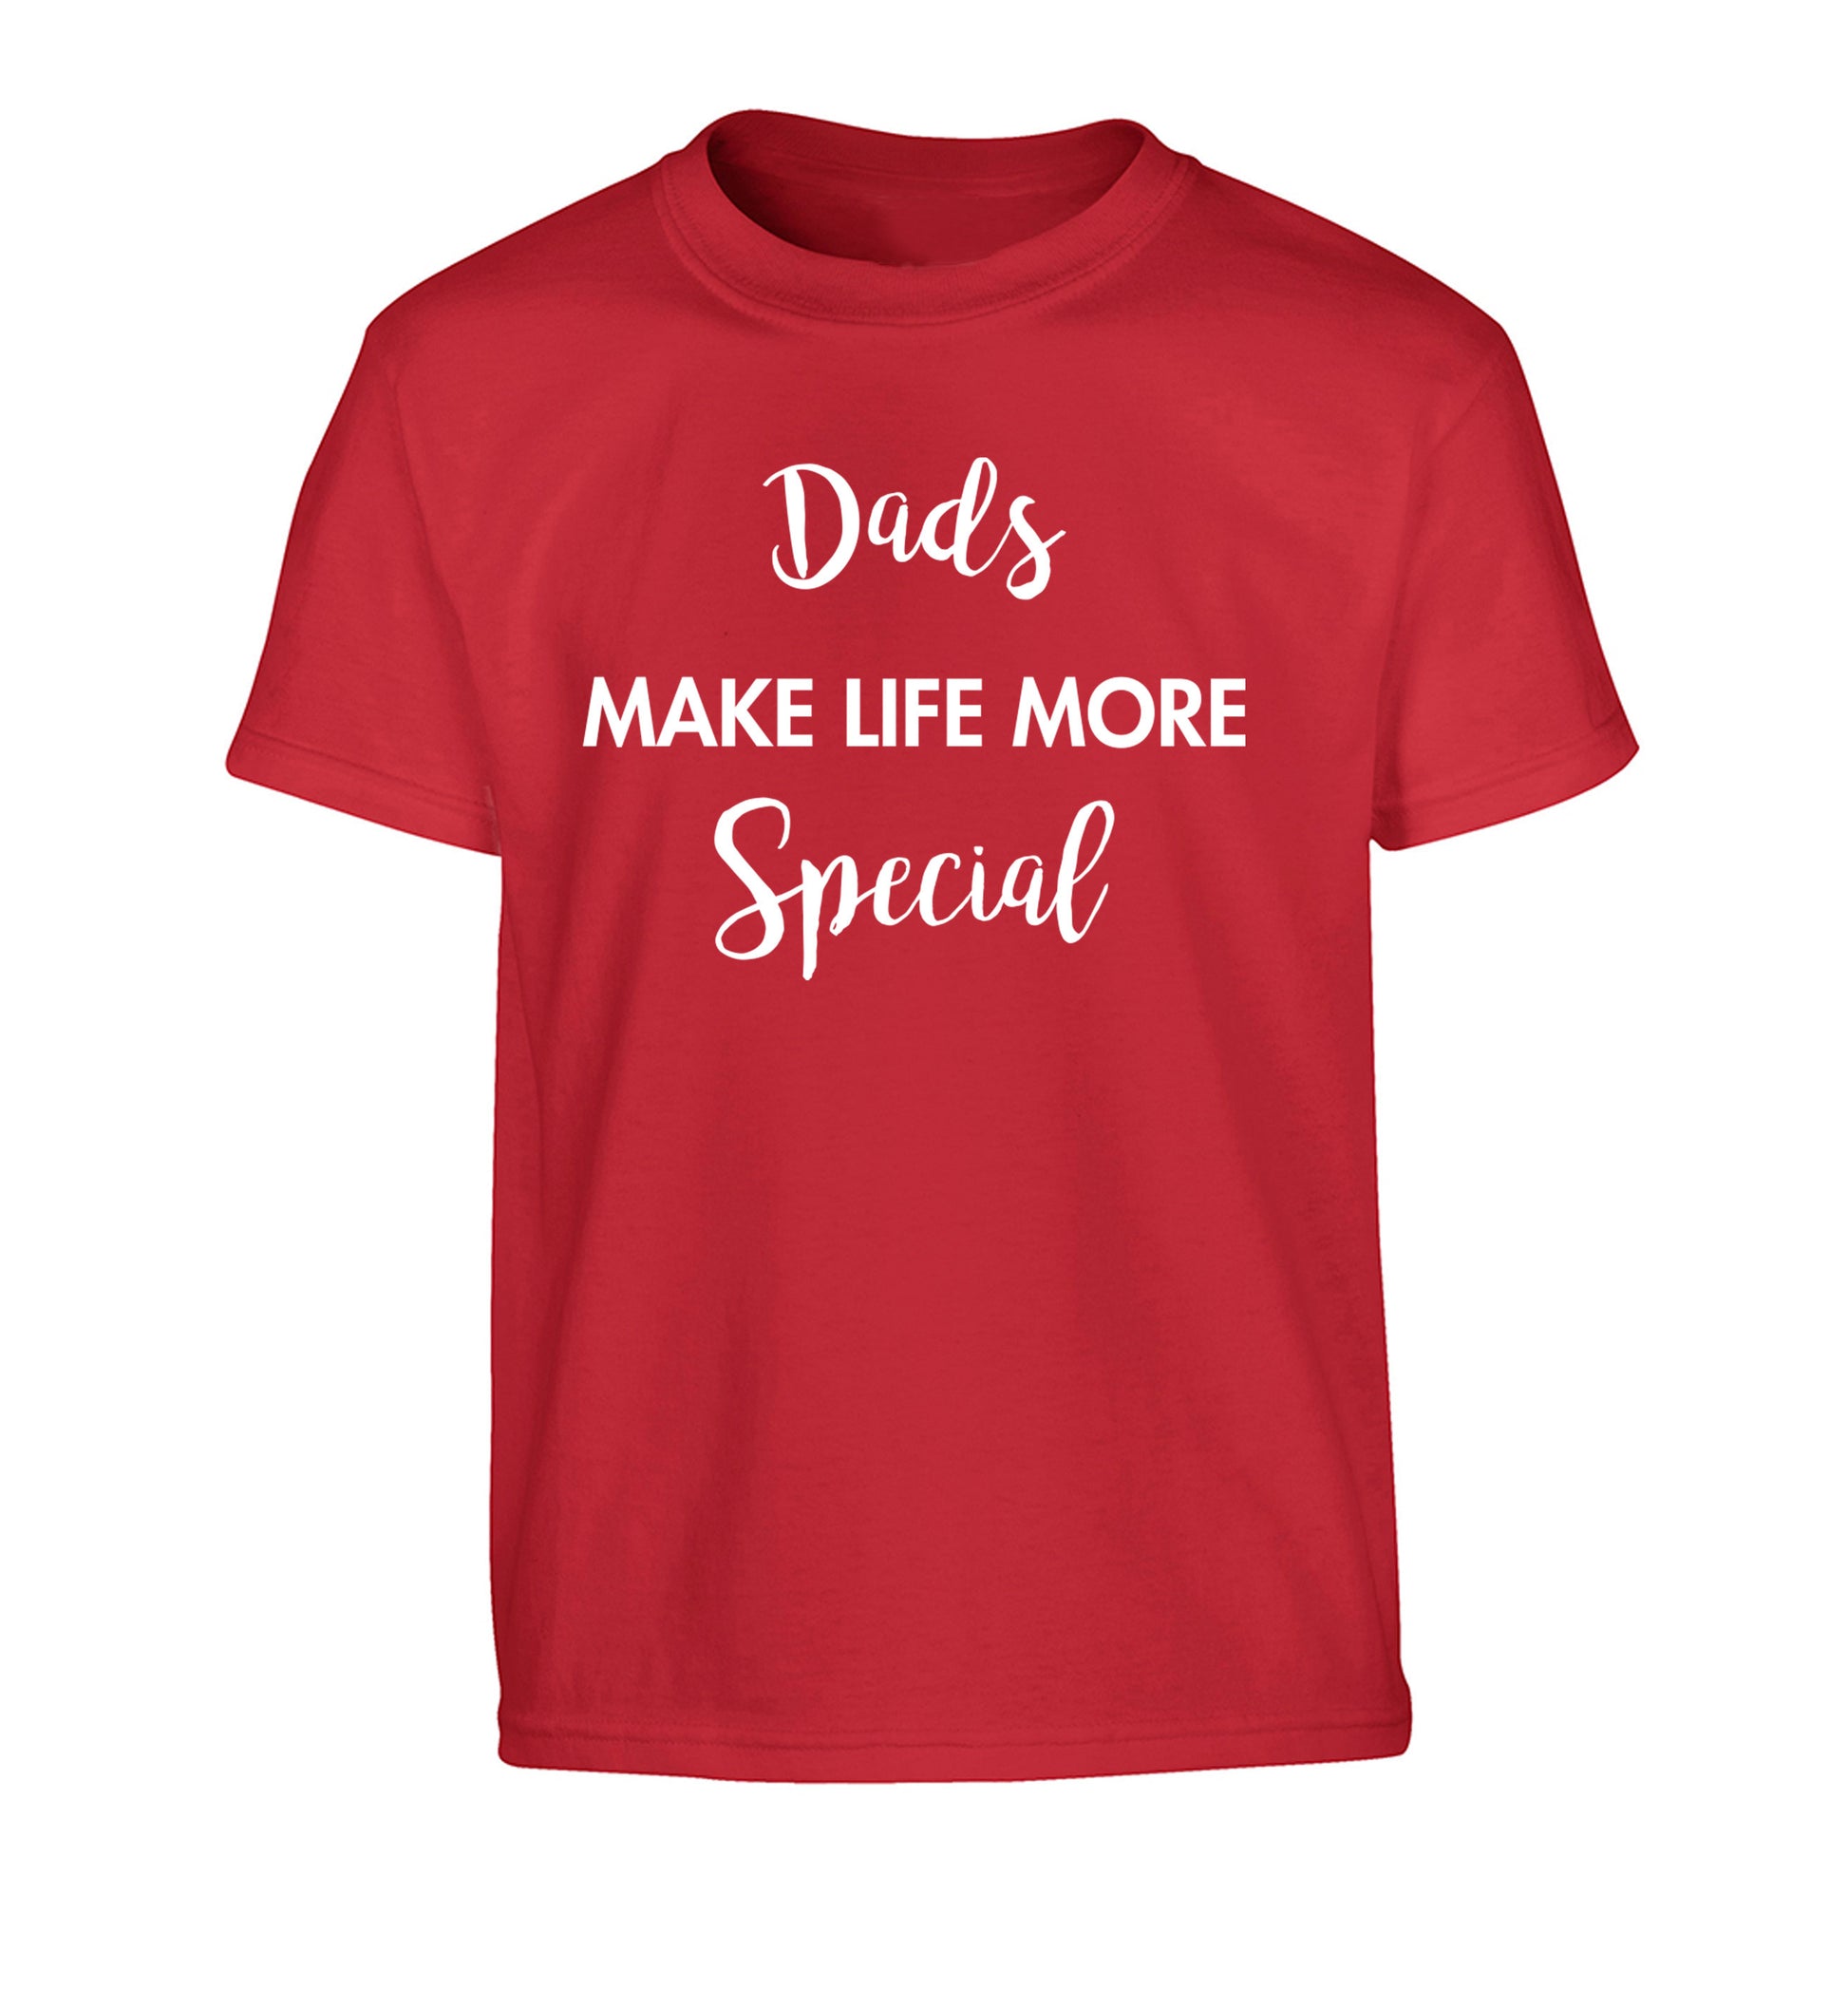 Dads make life more special Children's red Tshirt 12-14 Years